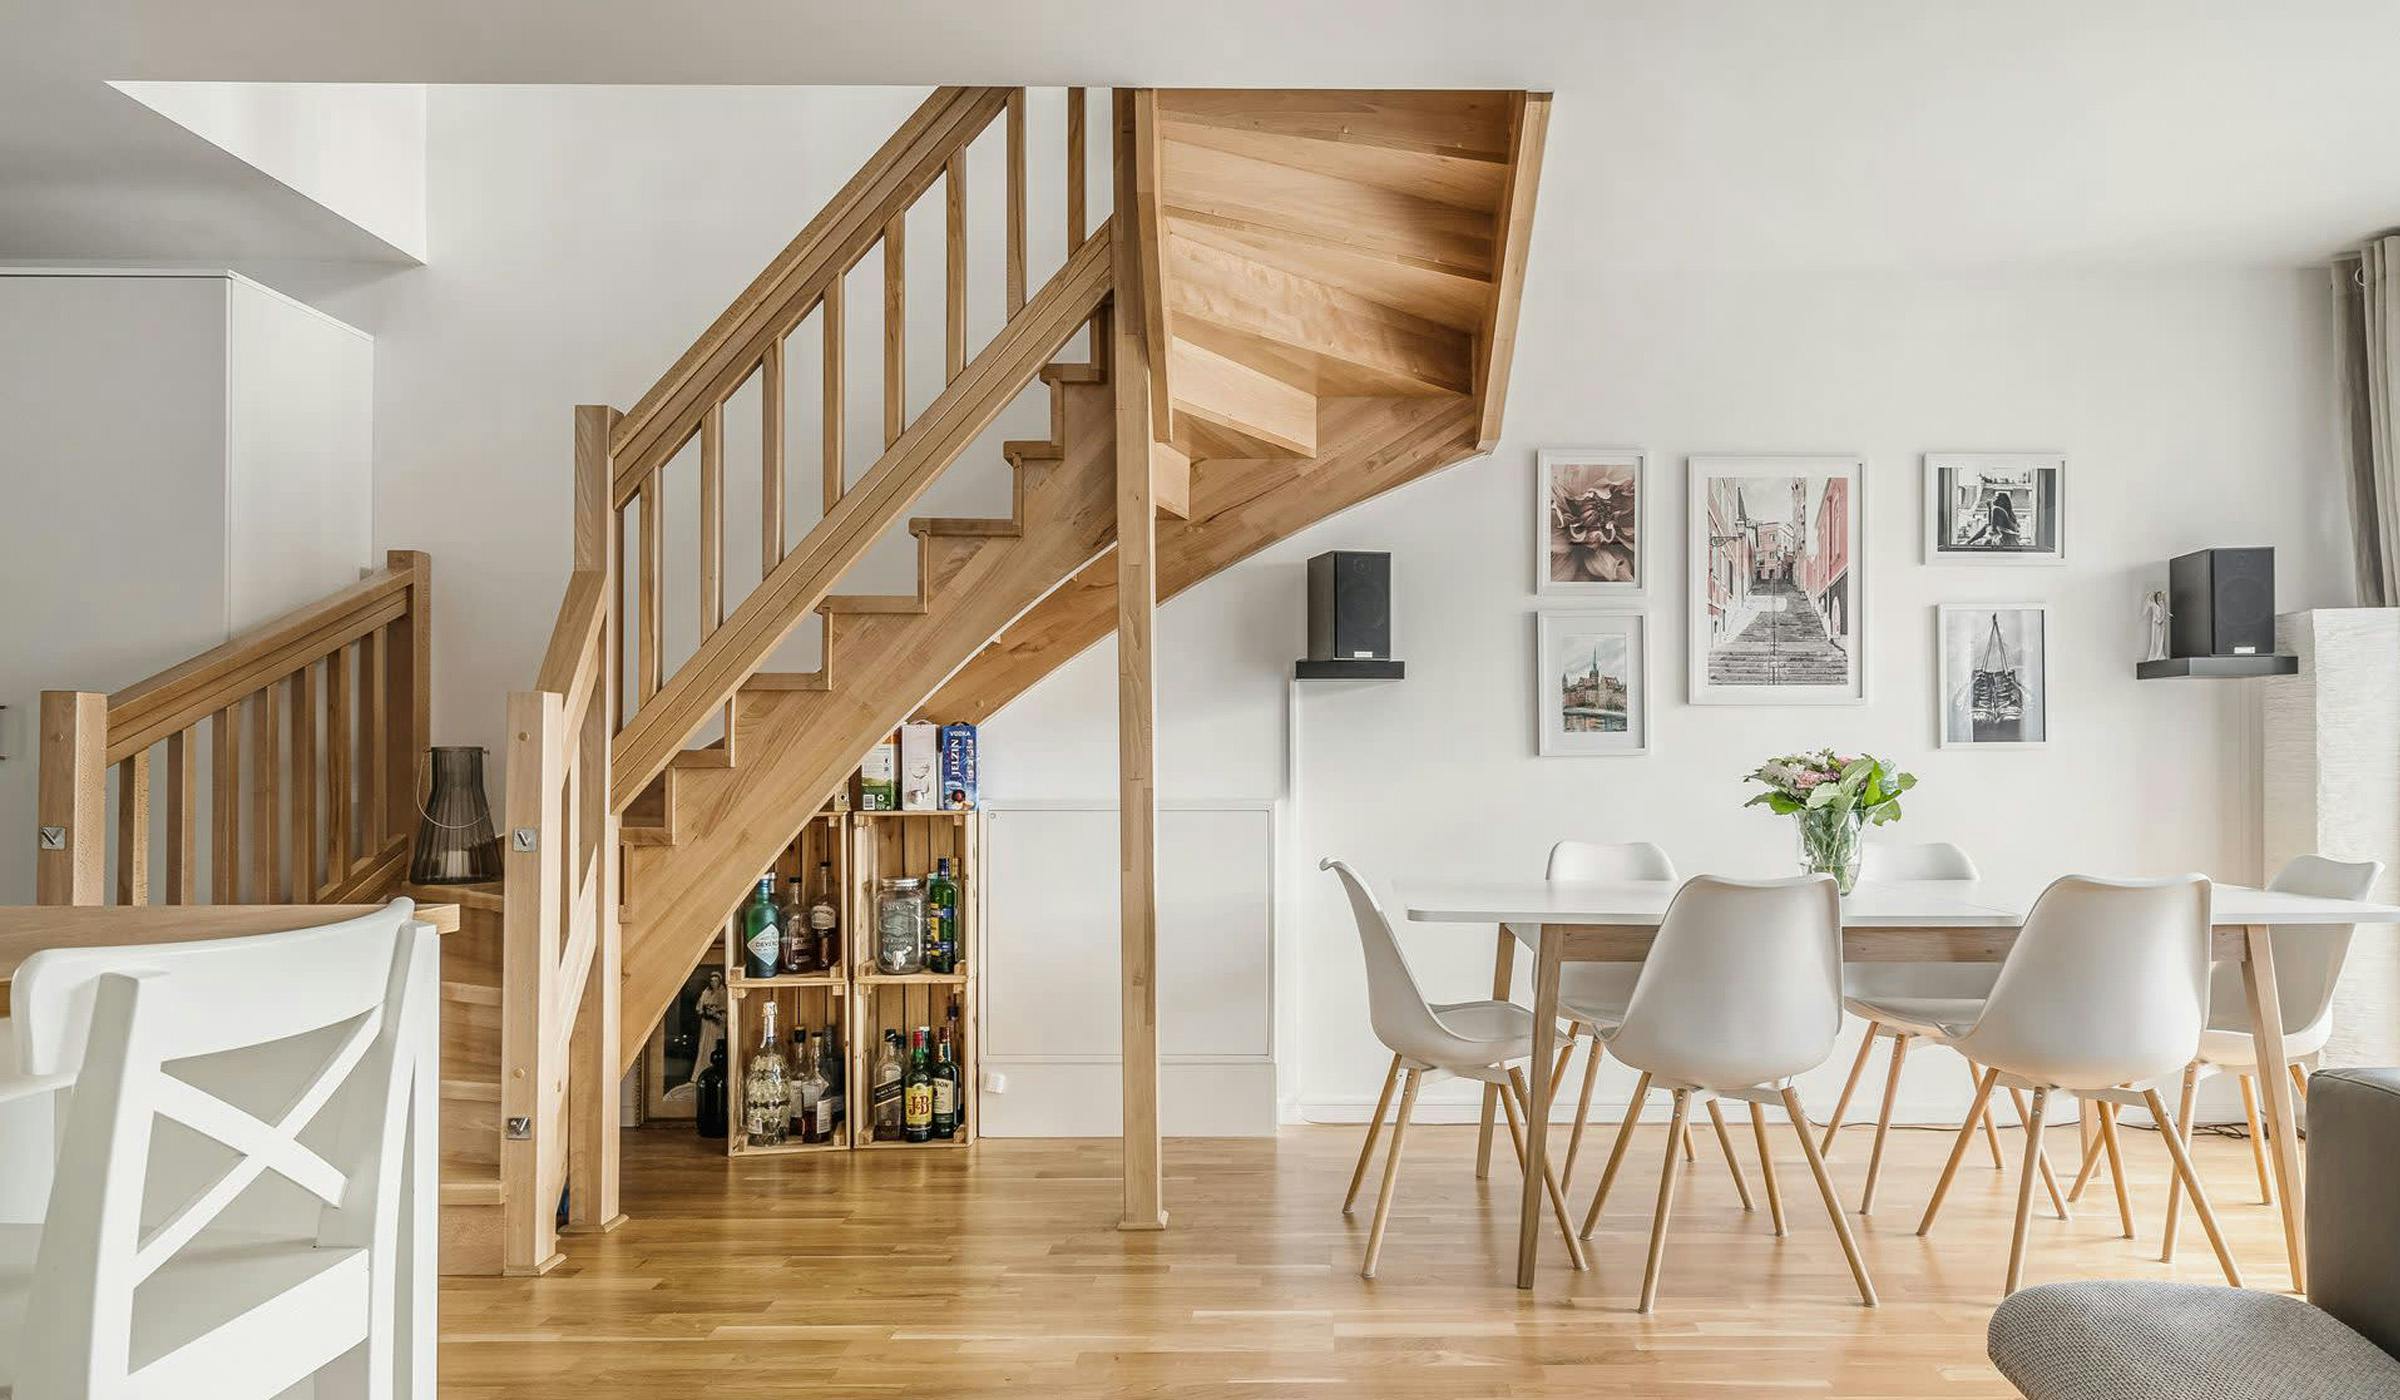 Wooden staircase with minimalistic interior design